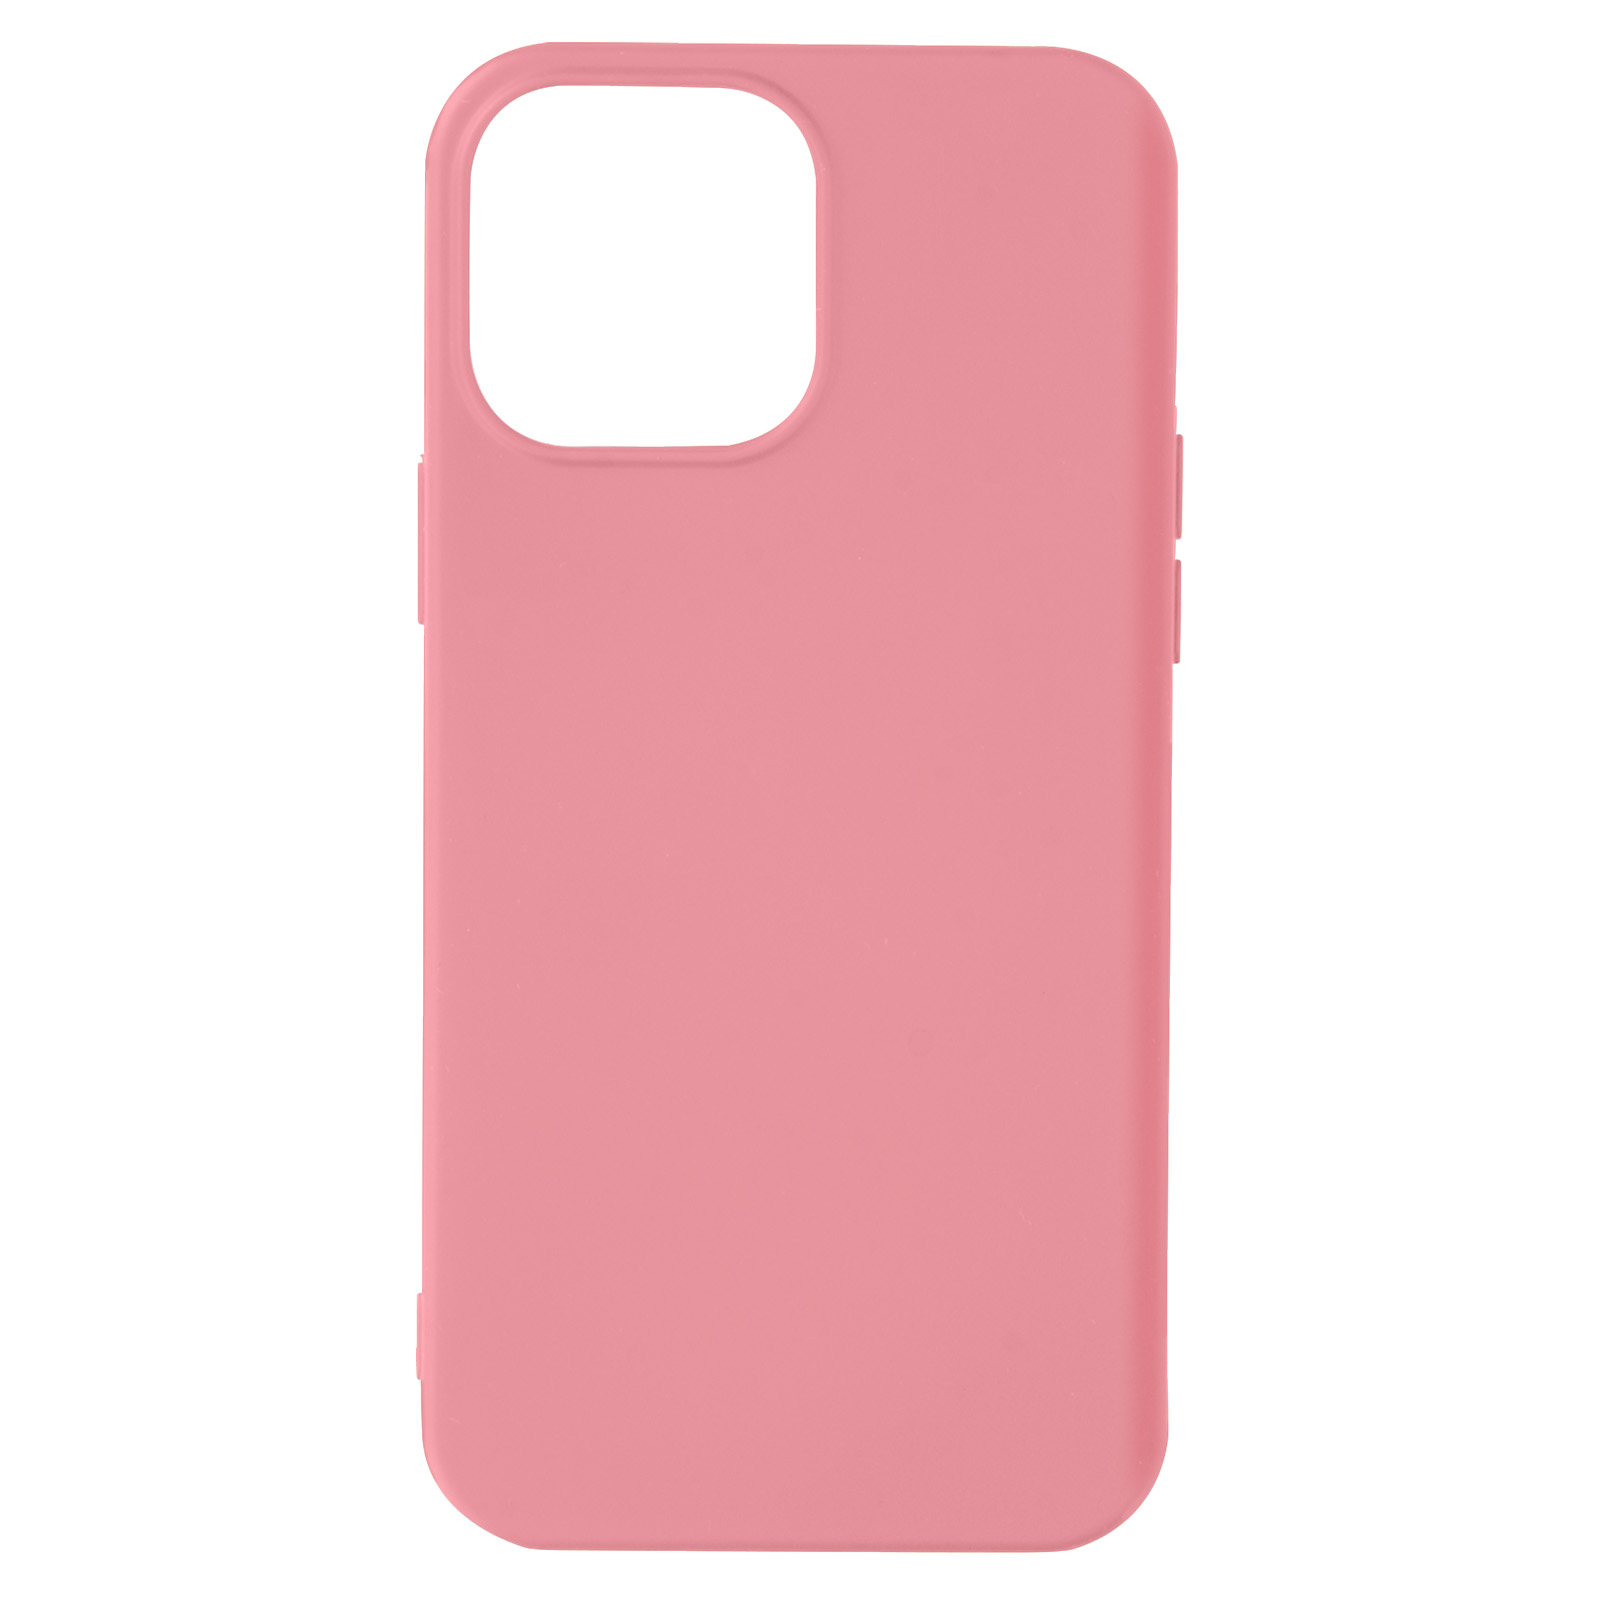 Fast Pro Rosa Max, 13 AVIZAR Series, Apple, iPhone Backcover,